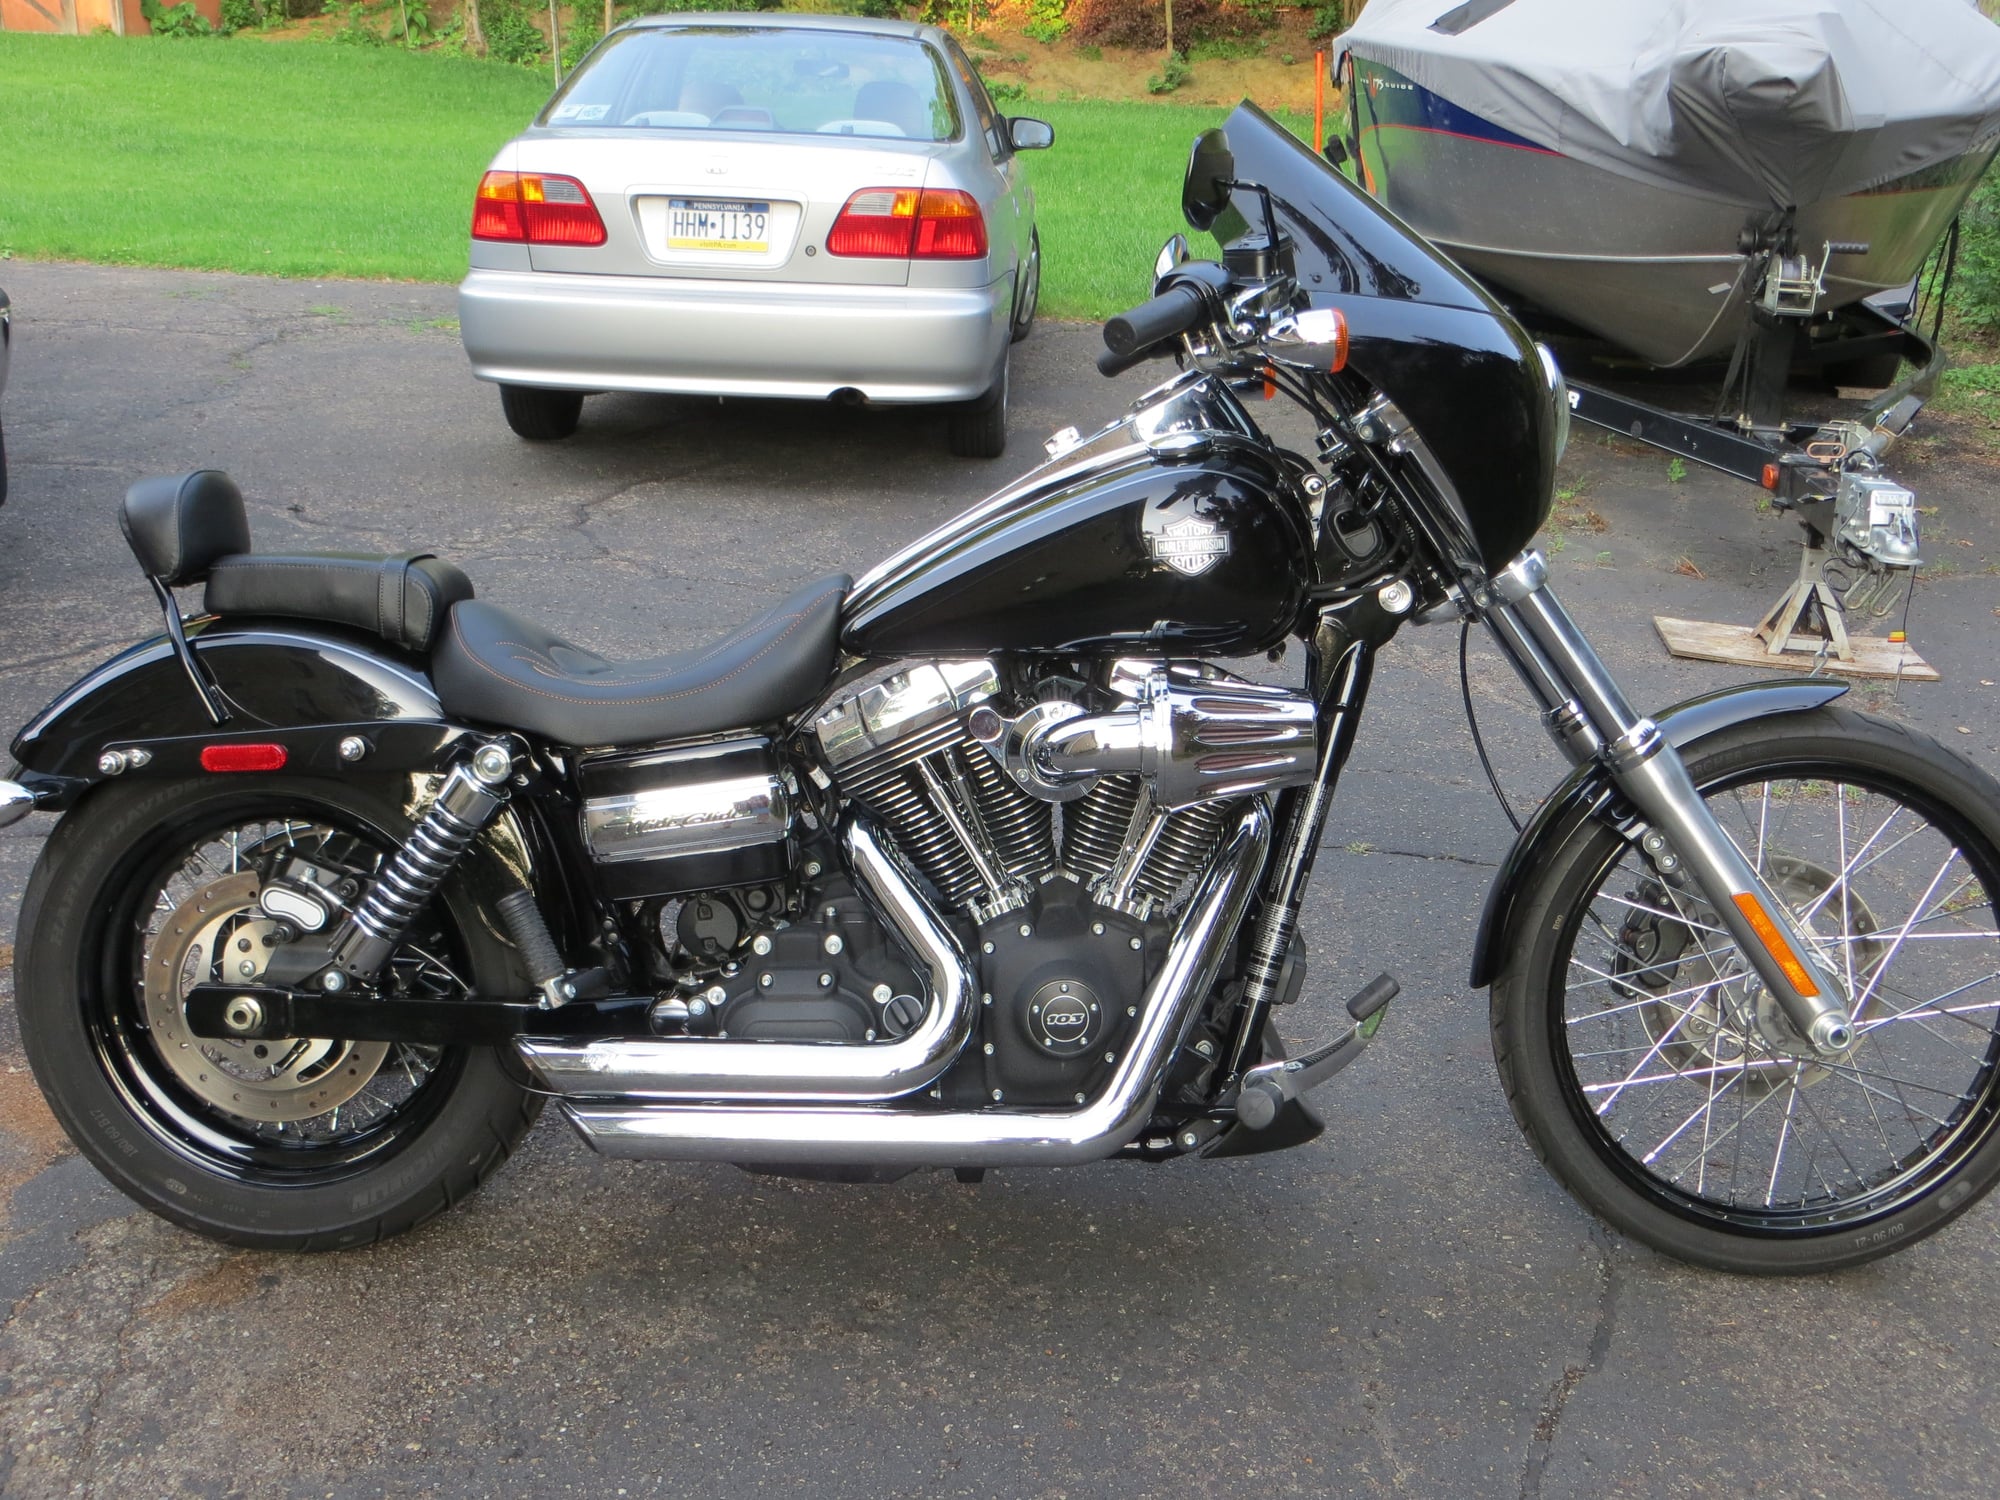 What did you do to your Dyna today? - Page 56 - Harley Davidson Forums